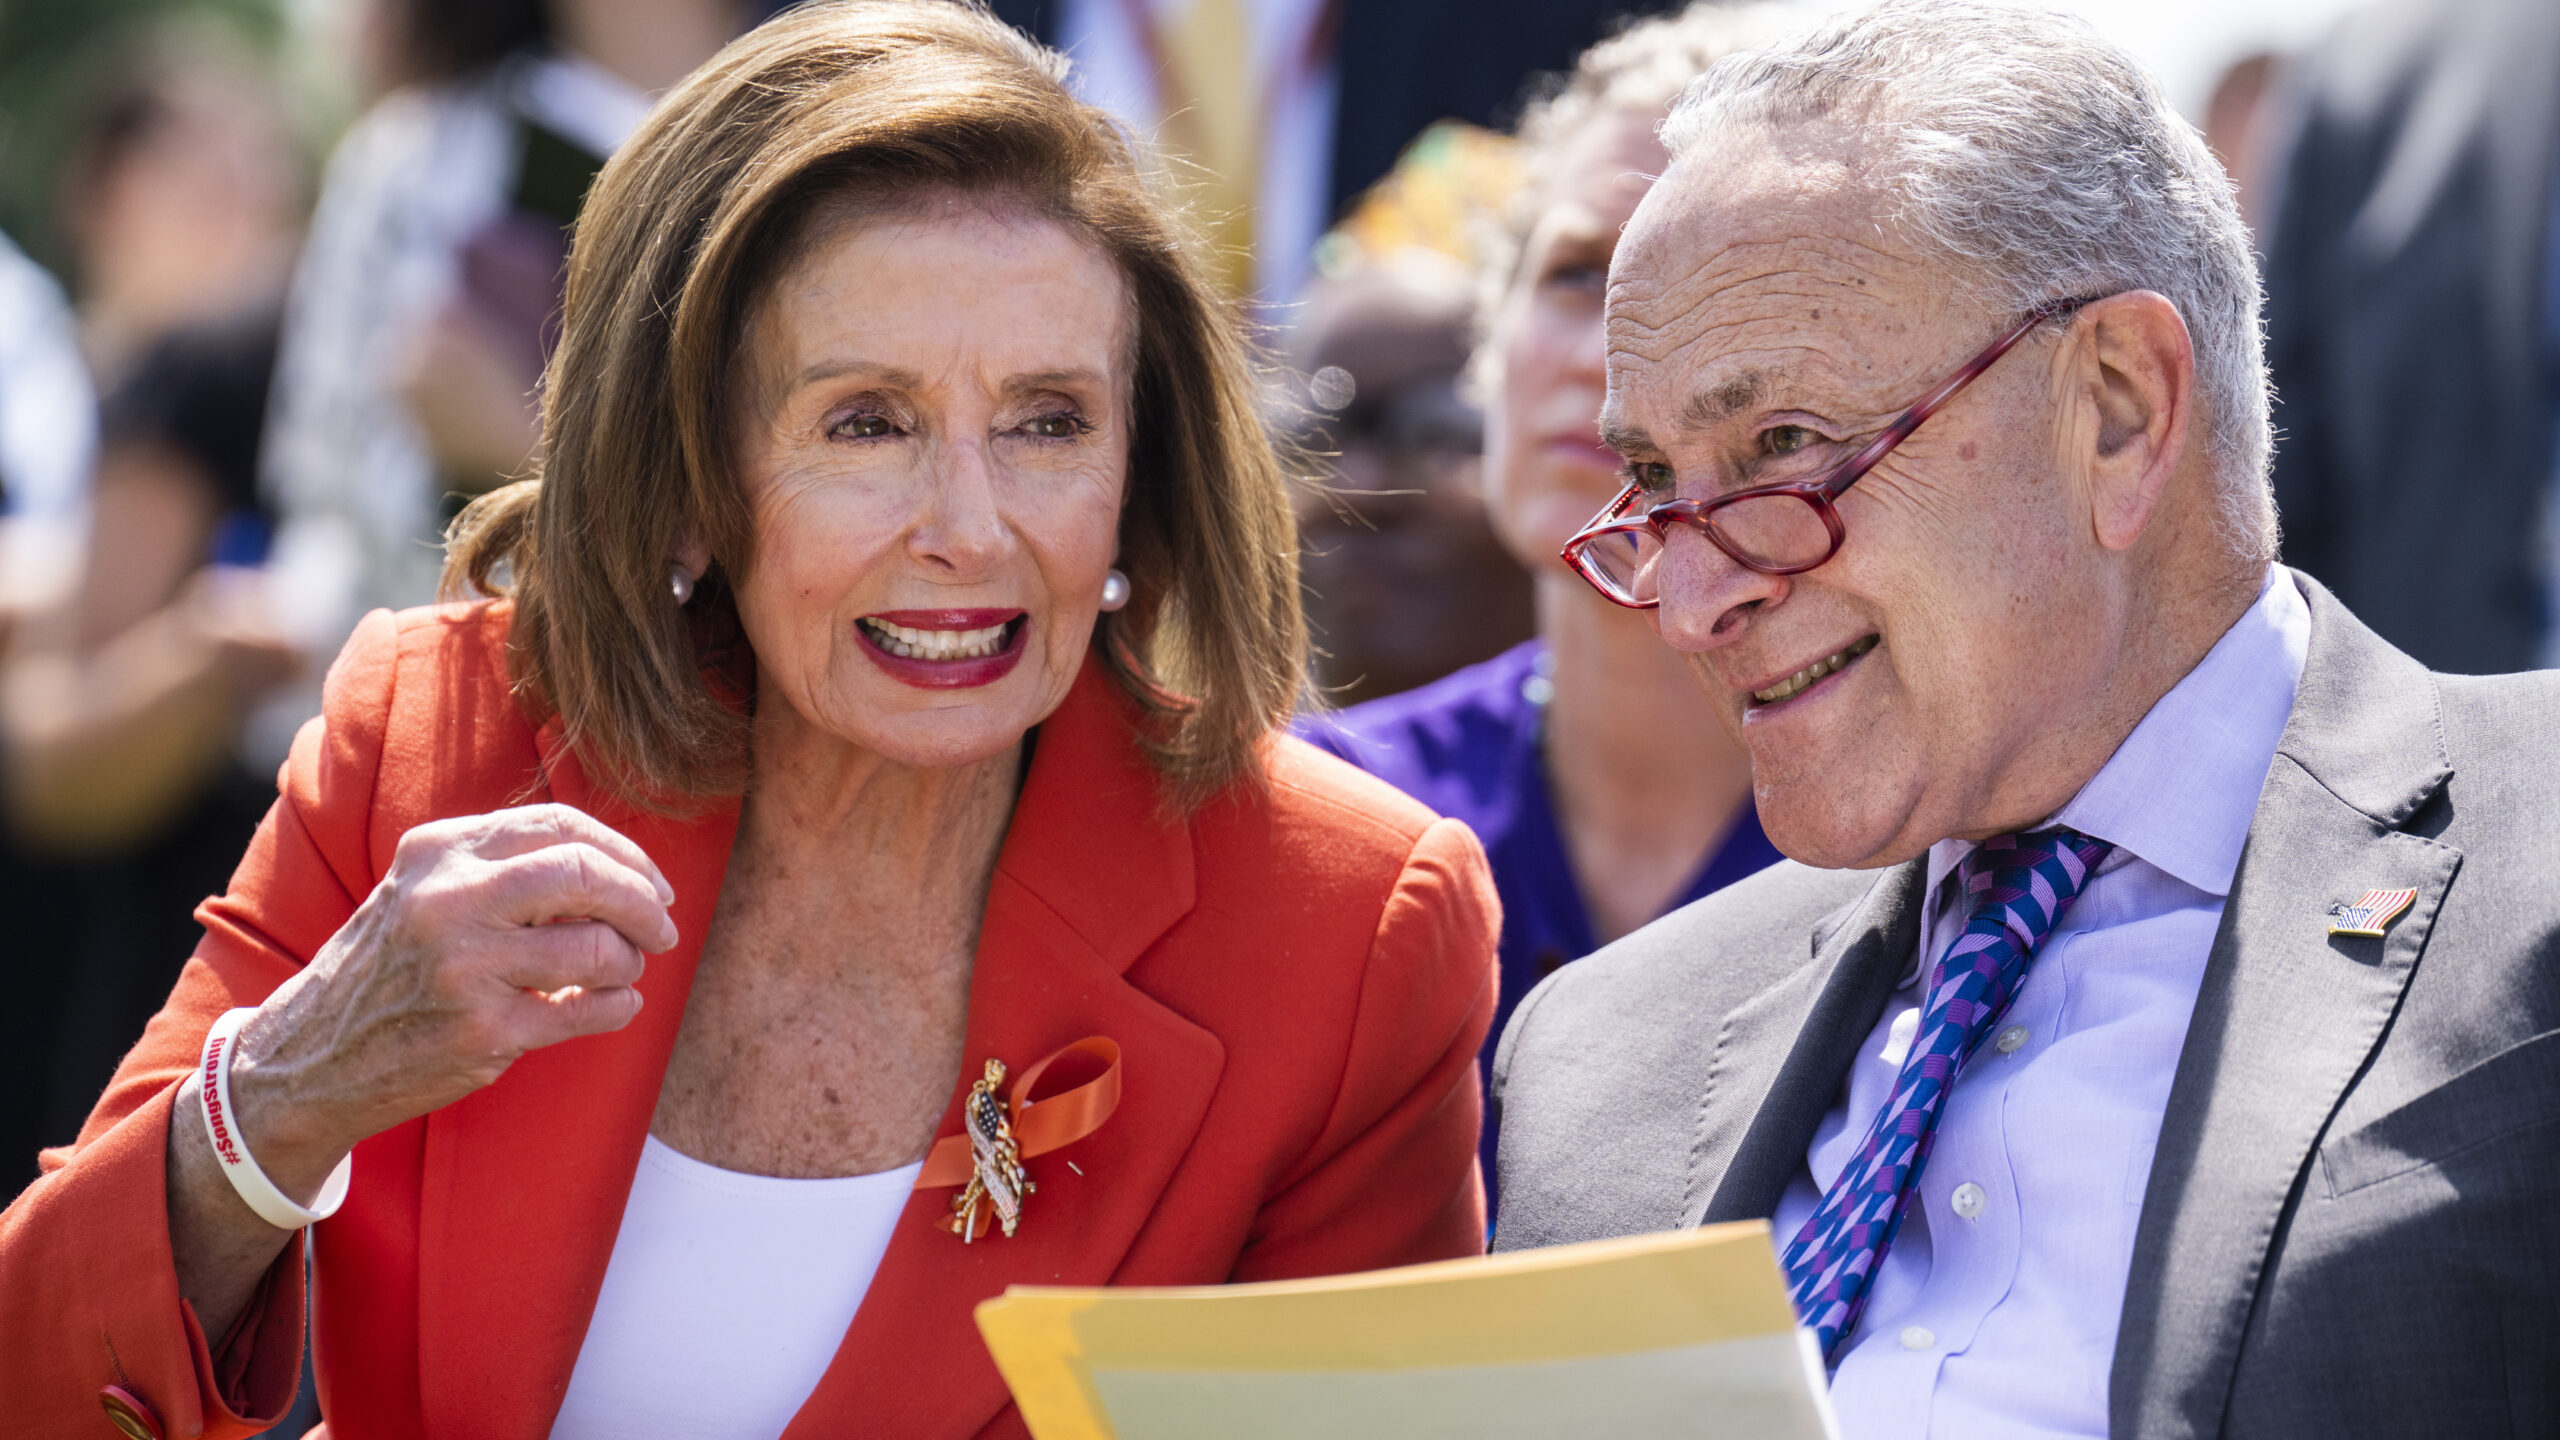 Pelosi And Schumer Have Very Different Reactions To FBI Raid On Mar-A-Lago